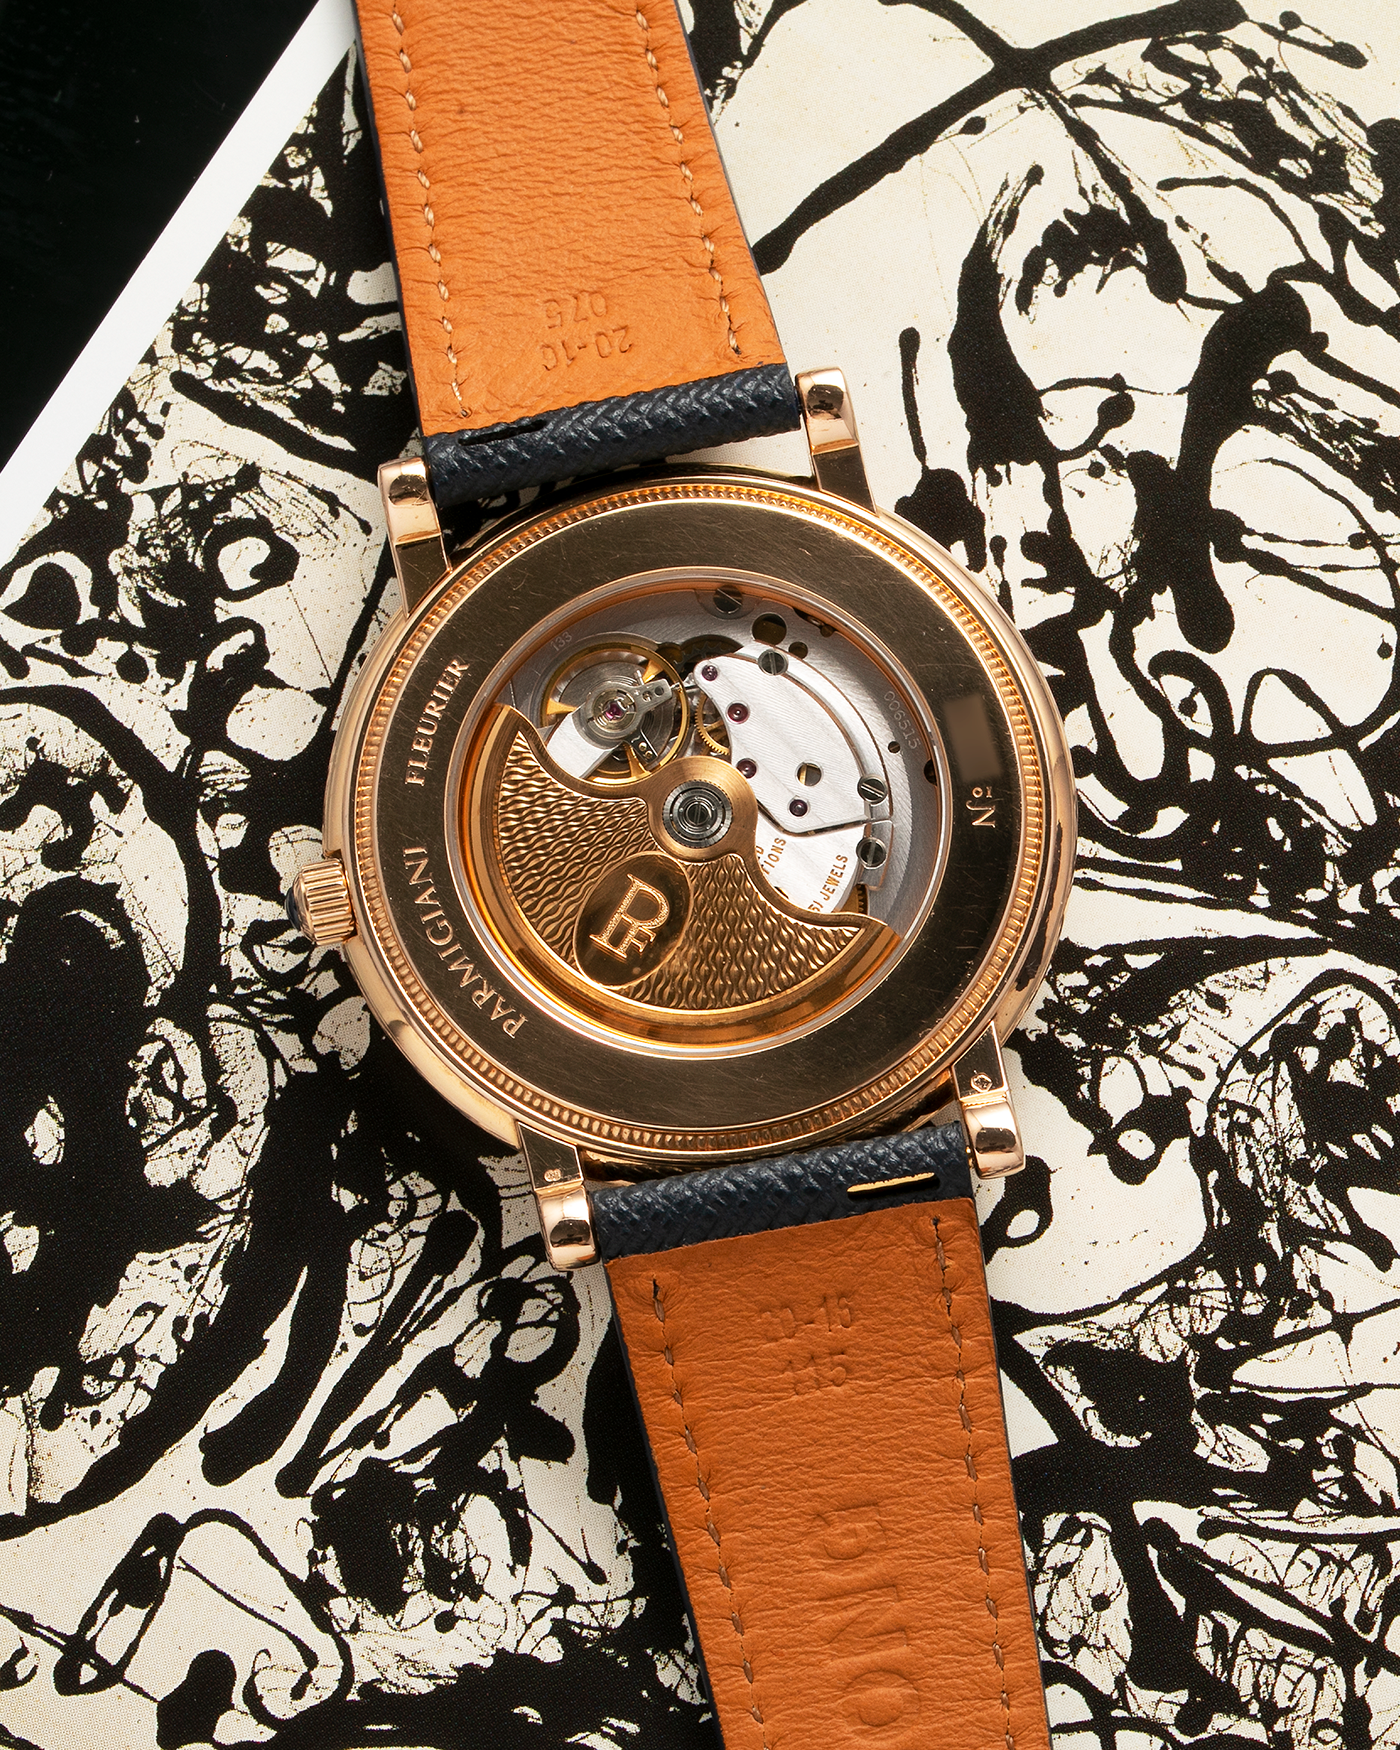 Brand: Parmigiani Fleurier Year: 1990’s Model: Toric Automatic Material: 18-carat Rose Gold Movement: PF Cal. 13301, Self-Winding Case Diameter: 40mm Lug Width: 20mm Strap: Molequin Navy Textured Calf Leather Strap with Signed 18-carat Rose Gold Tang Buckle